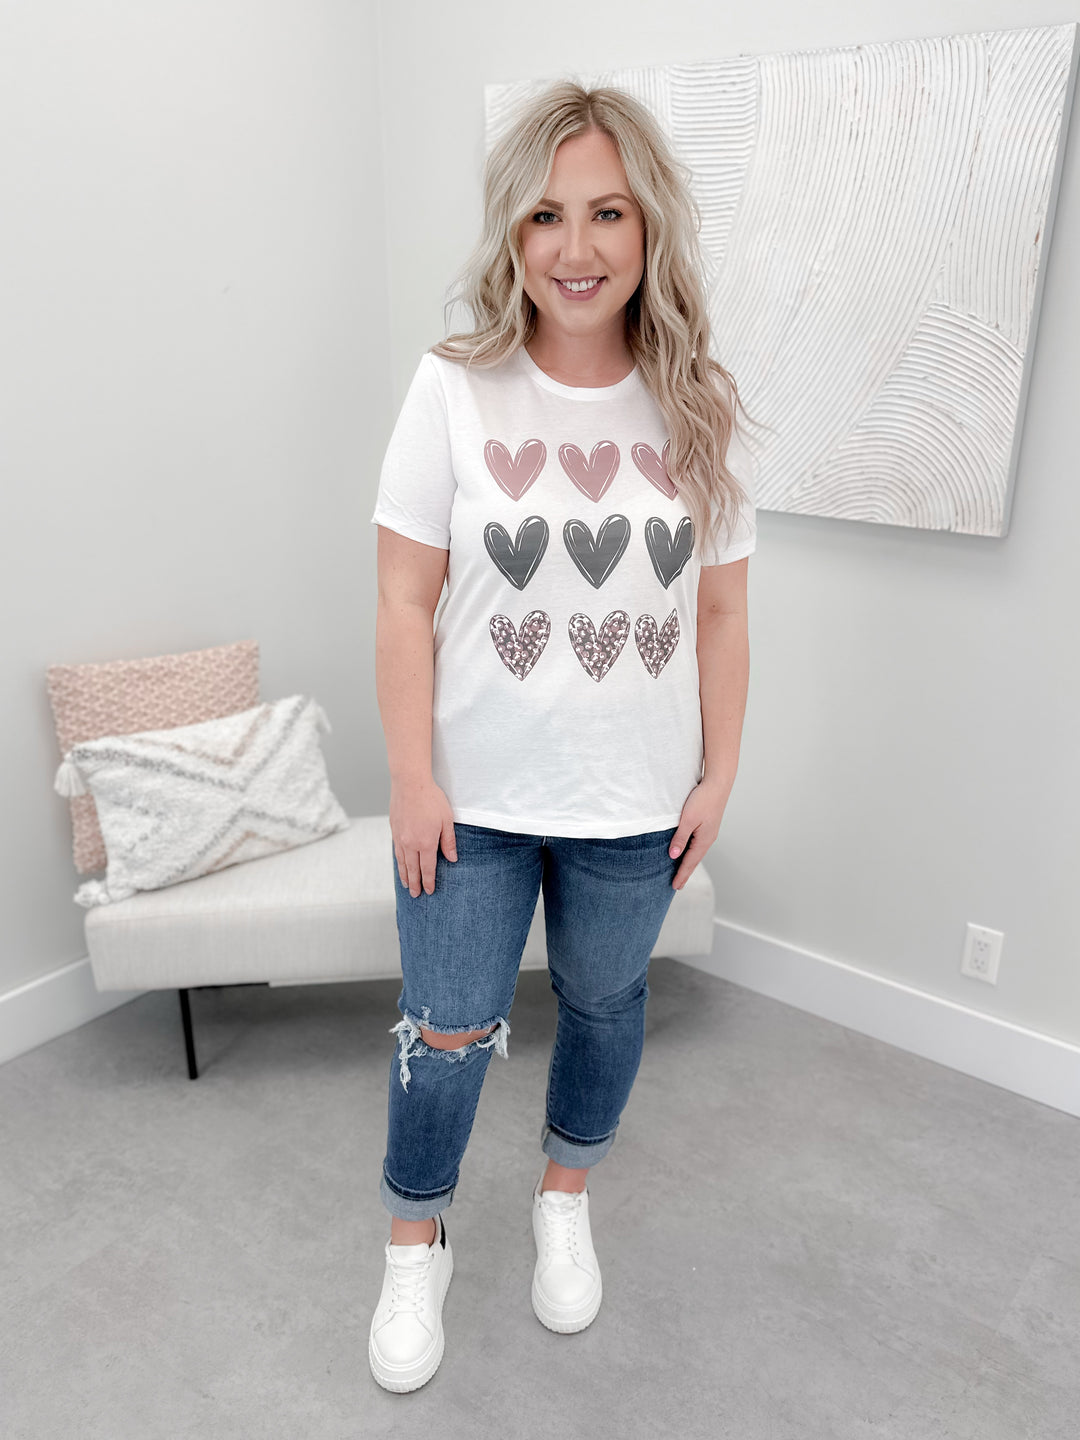 Heart Stamp Tee in Mauve Mix by Ash + Antler